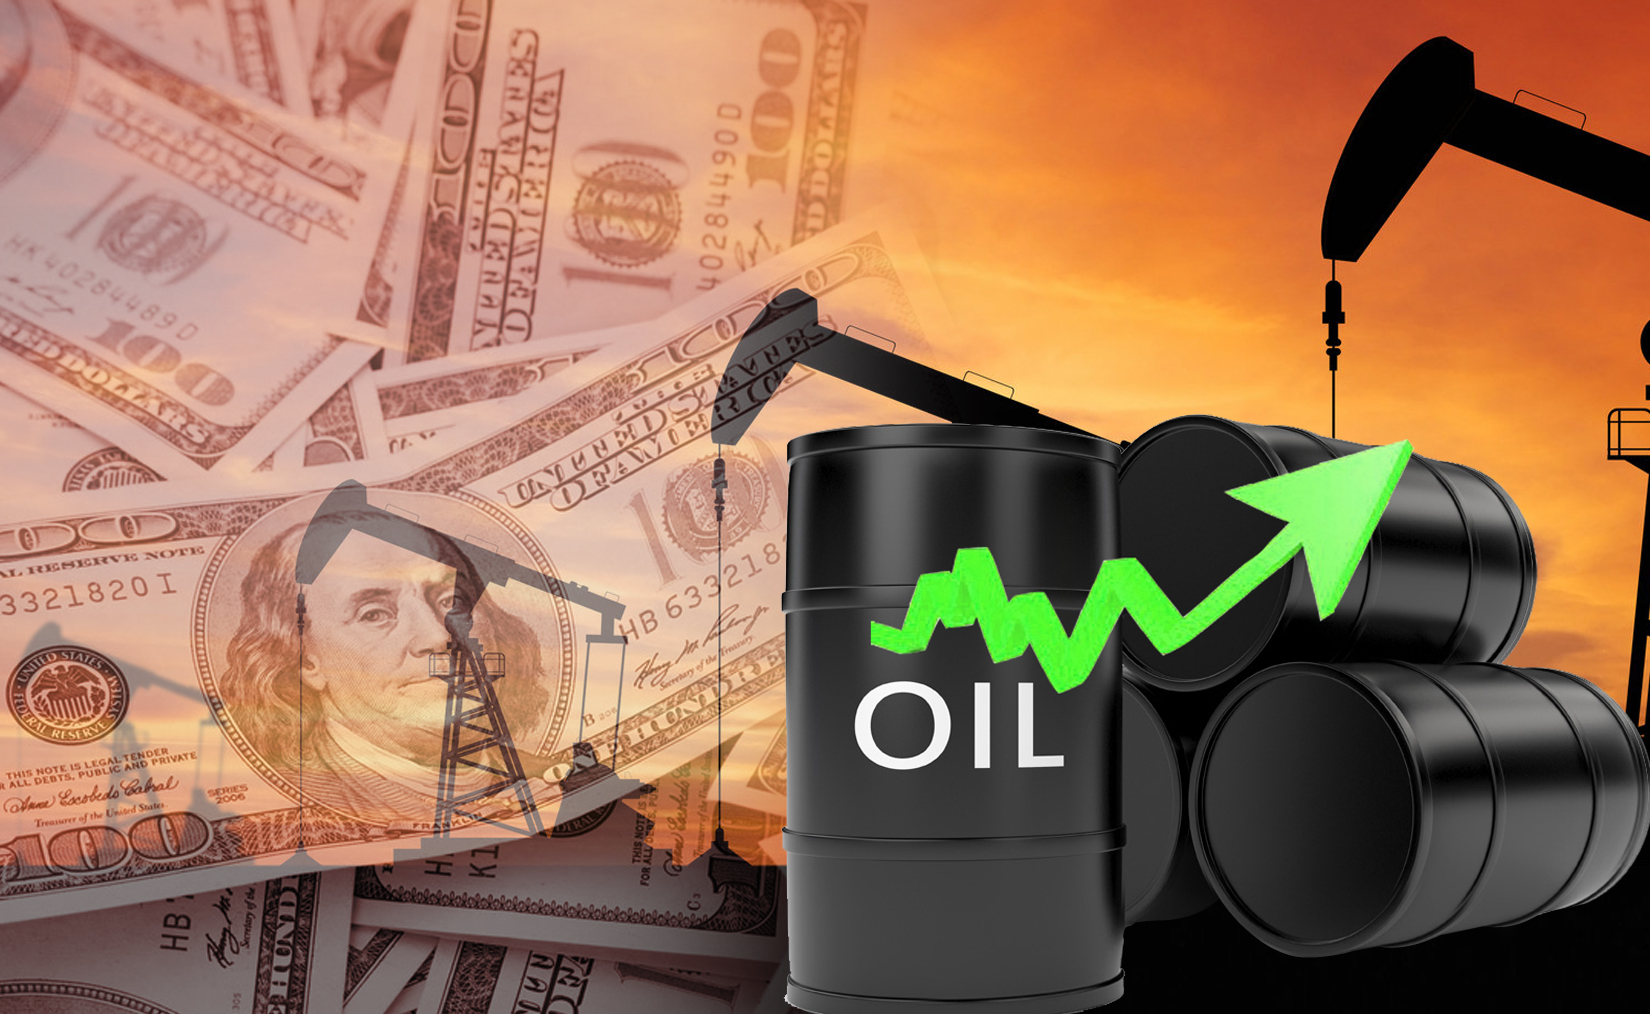 Kuwait oil price up 87 cents to USD 70.82 pb                                                                                                                                                                                                              